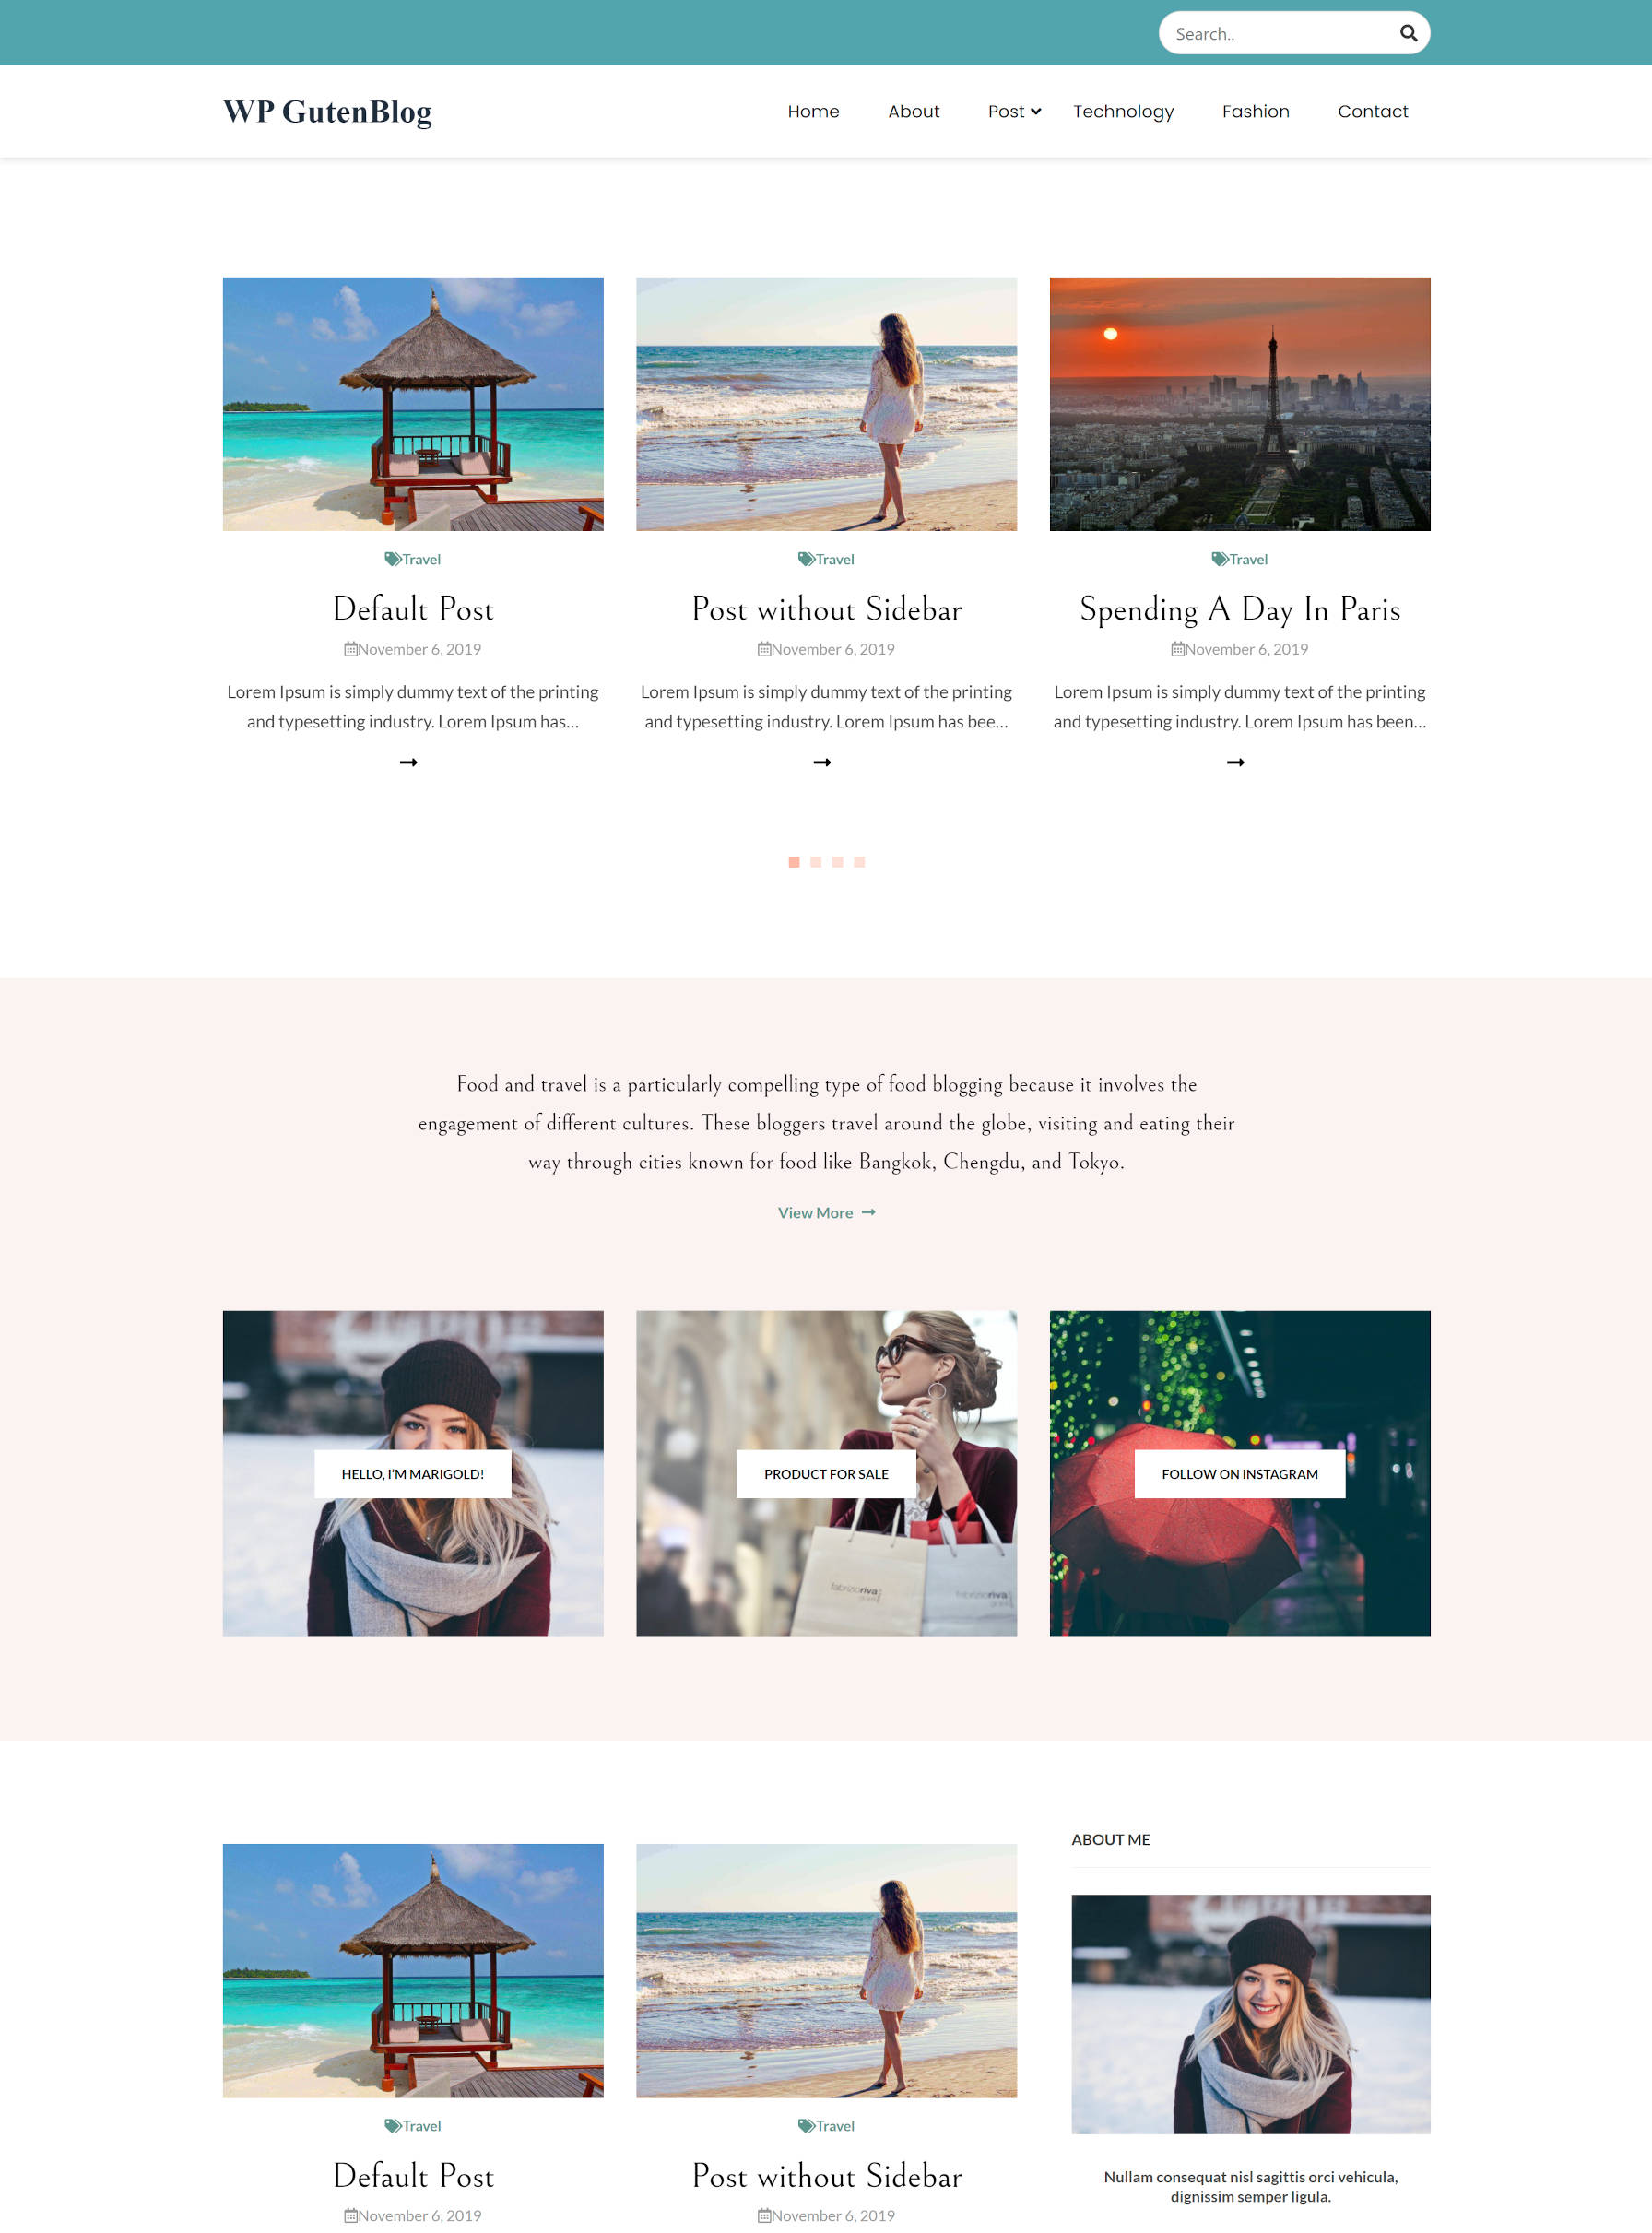 WordPress theme homepage design with carousel of posts, followed by section of boxes, followed by more posts.